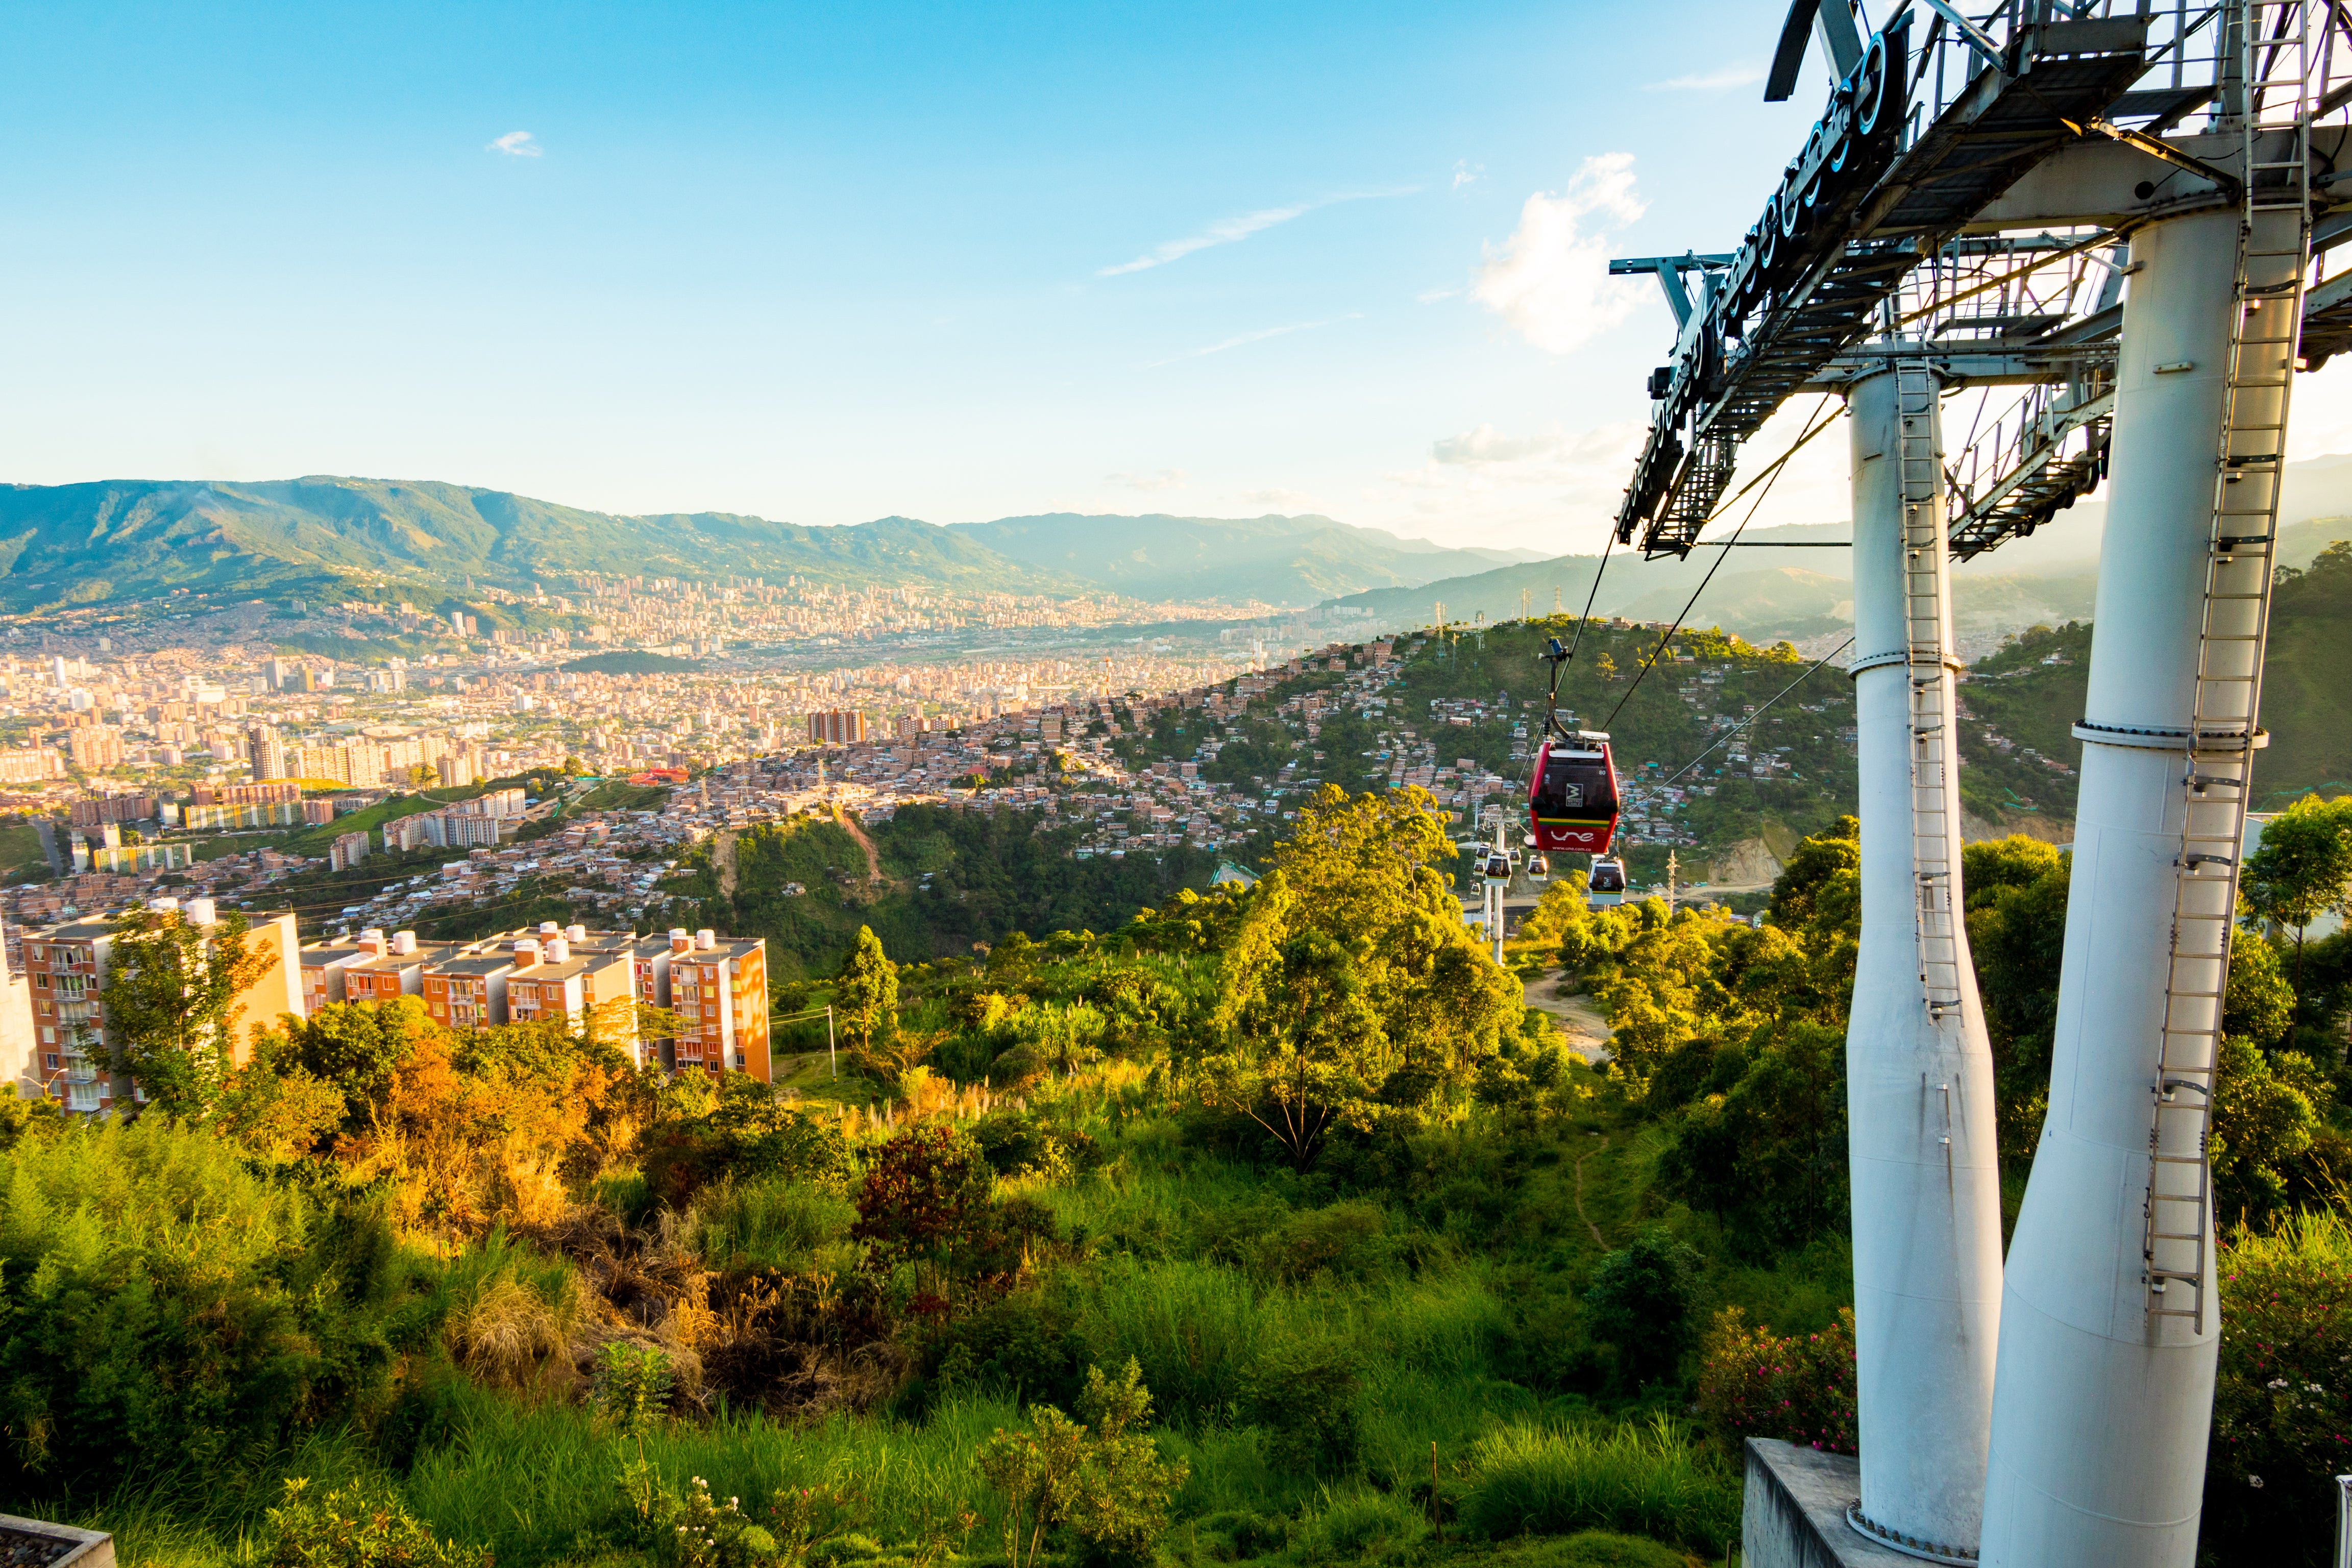 Medellín is dubbed the ‘City of Eternal Spring’